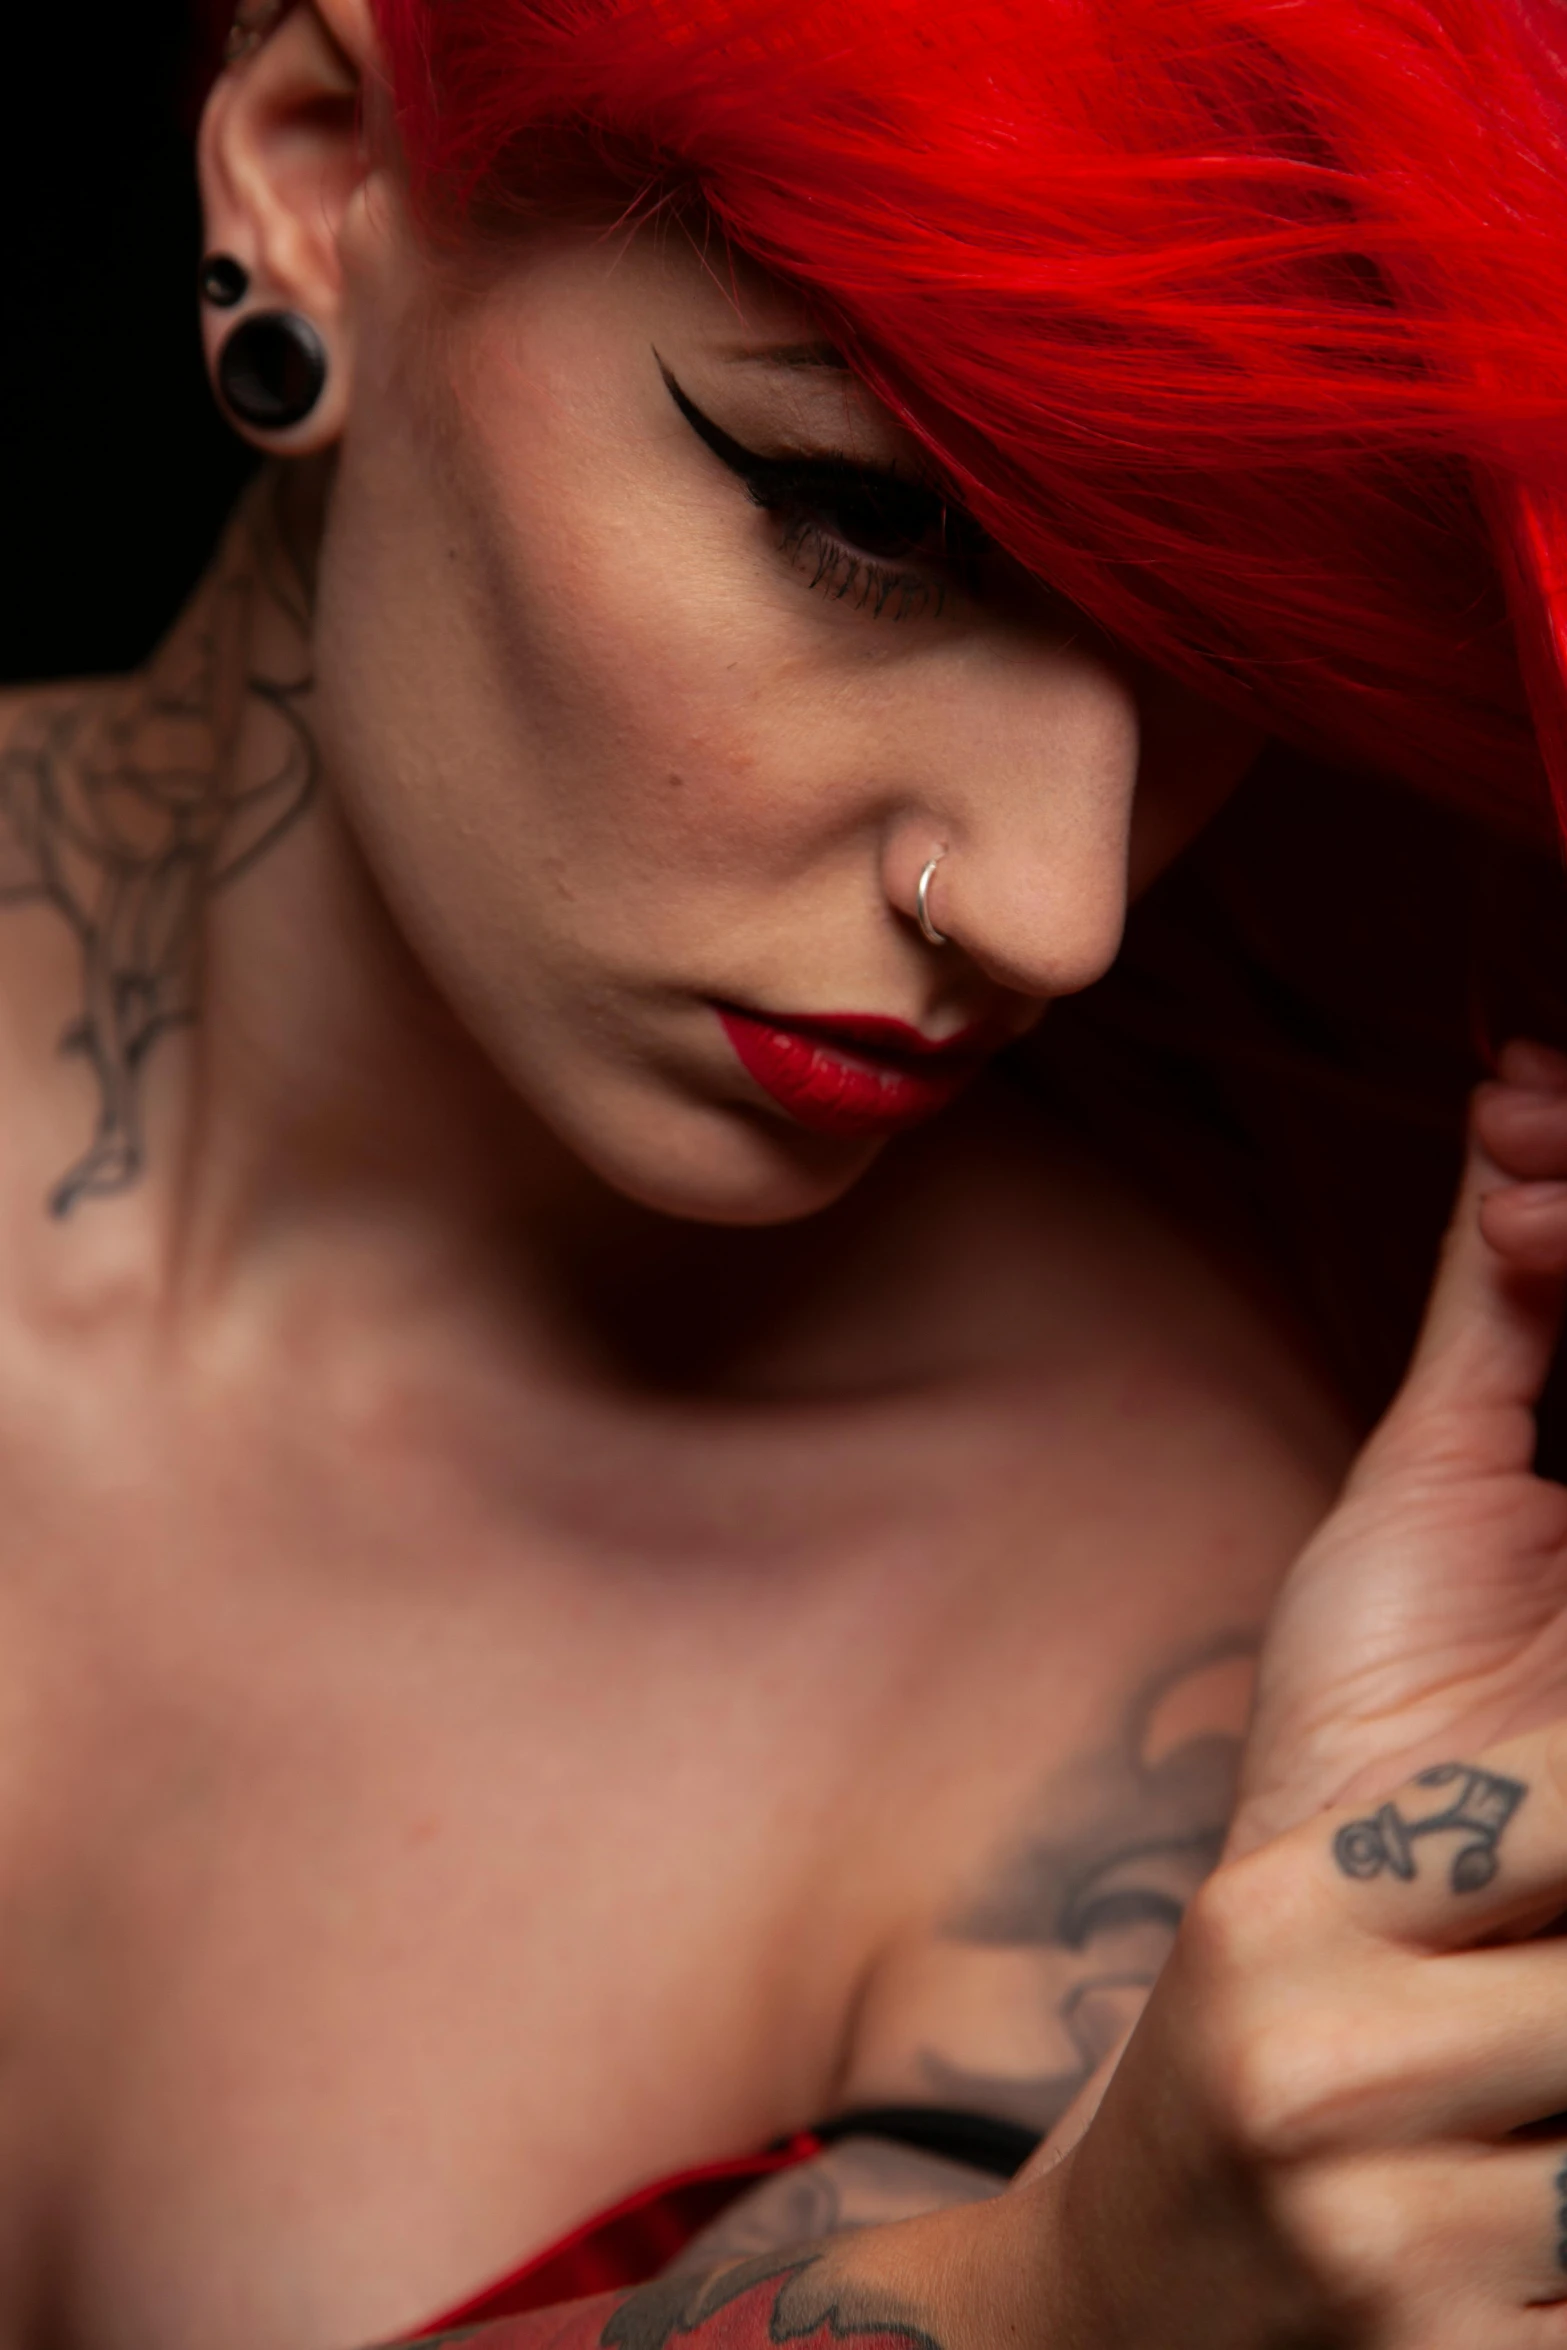 the woman has red hair and piercings on her ear